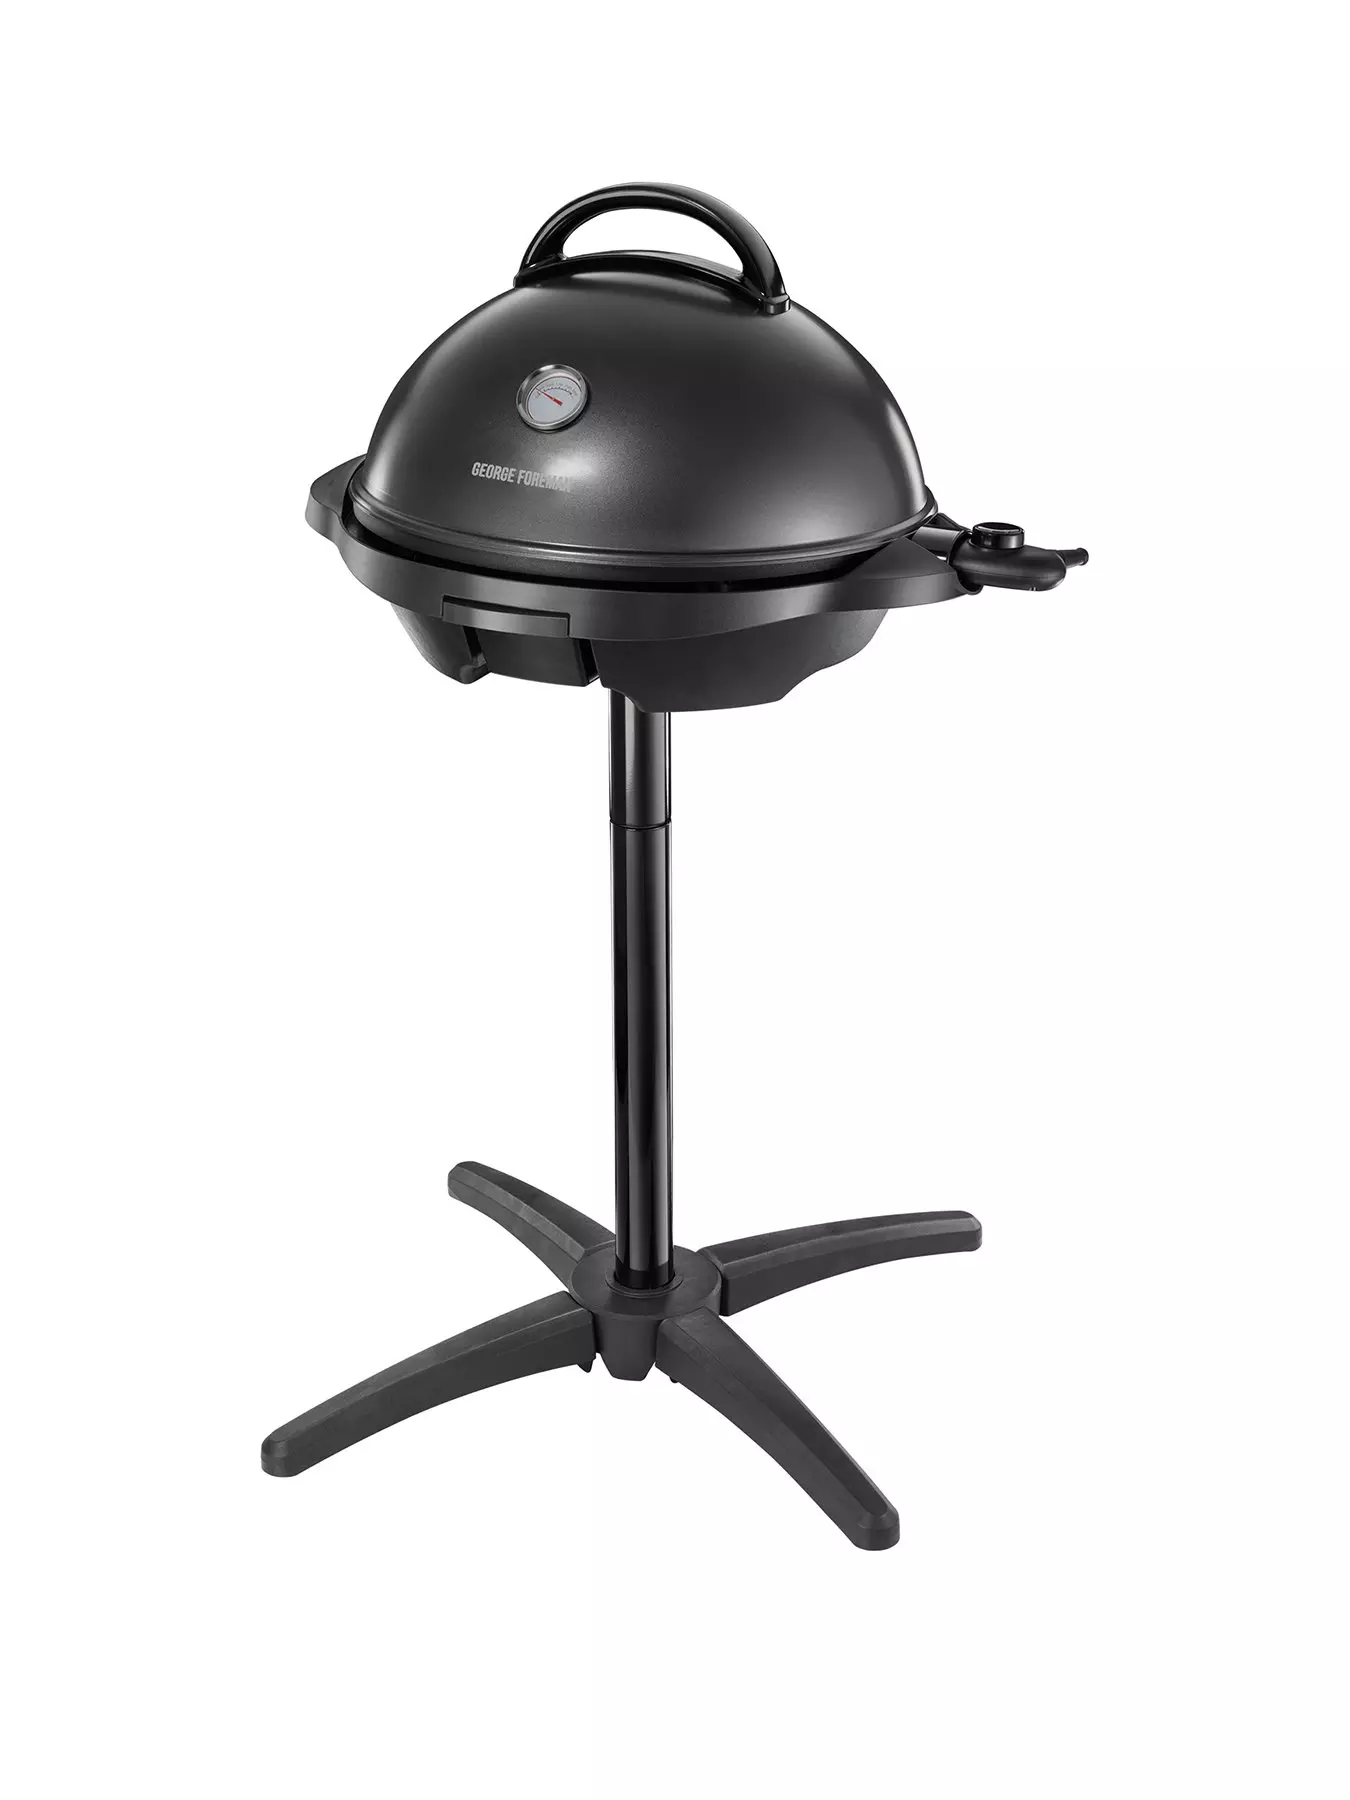 George Foreman Smokeless Grill Series, Party Size, 172 sq in